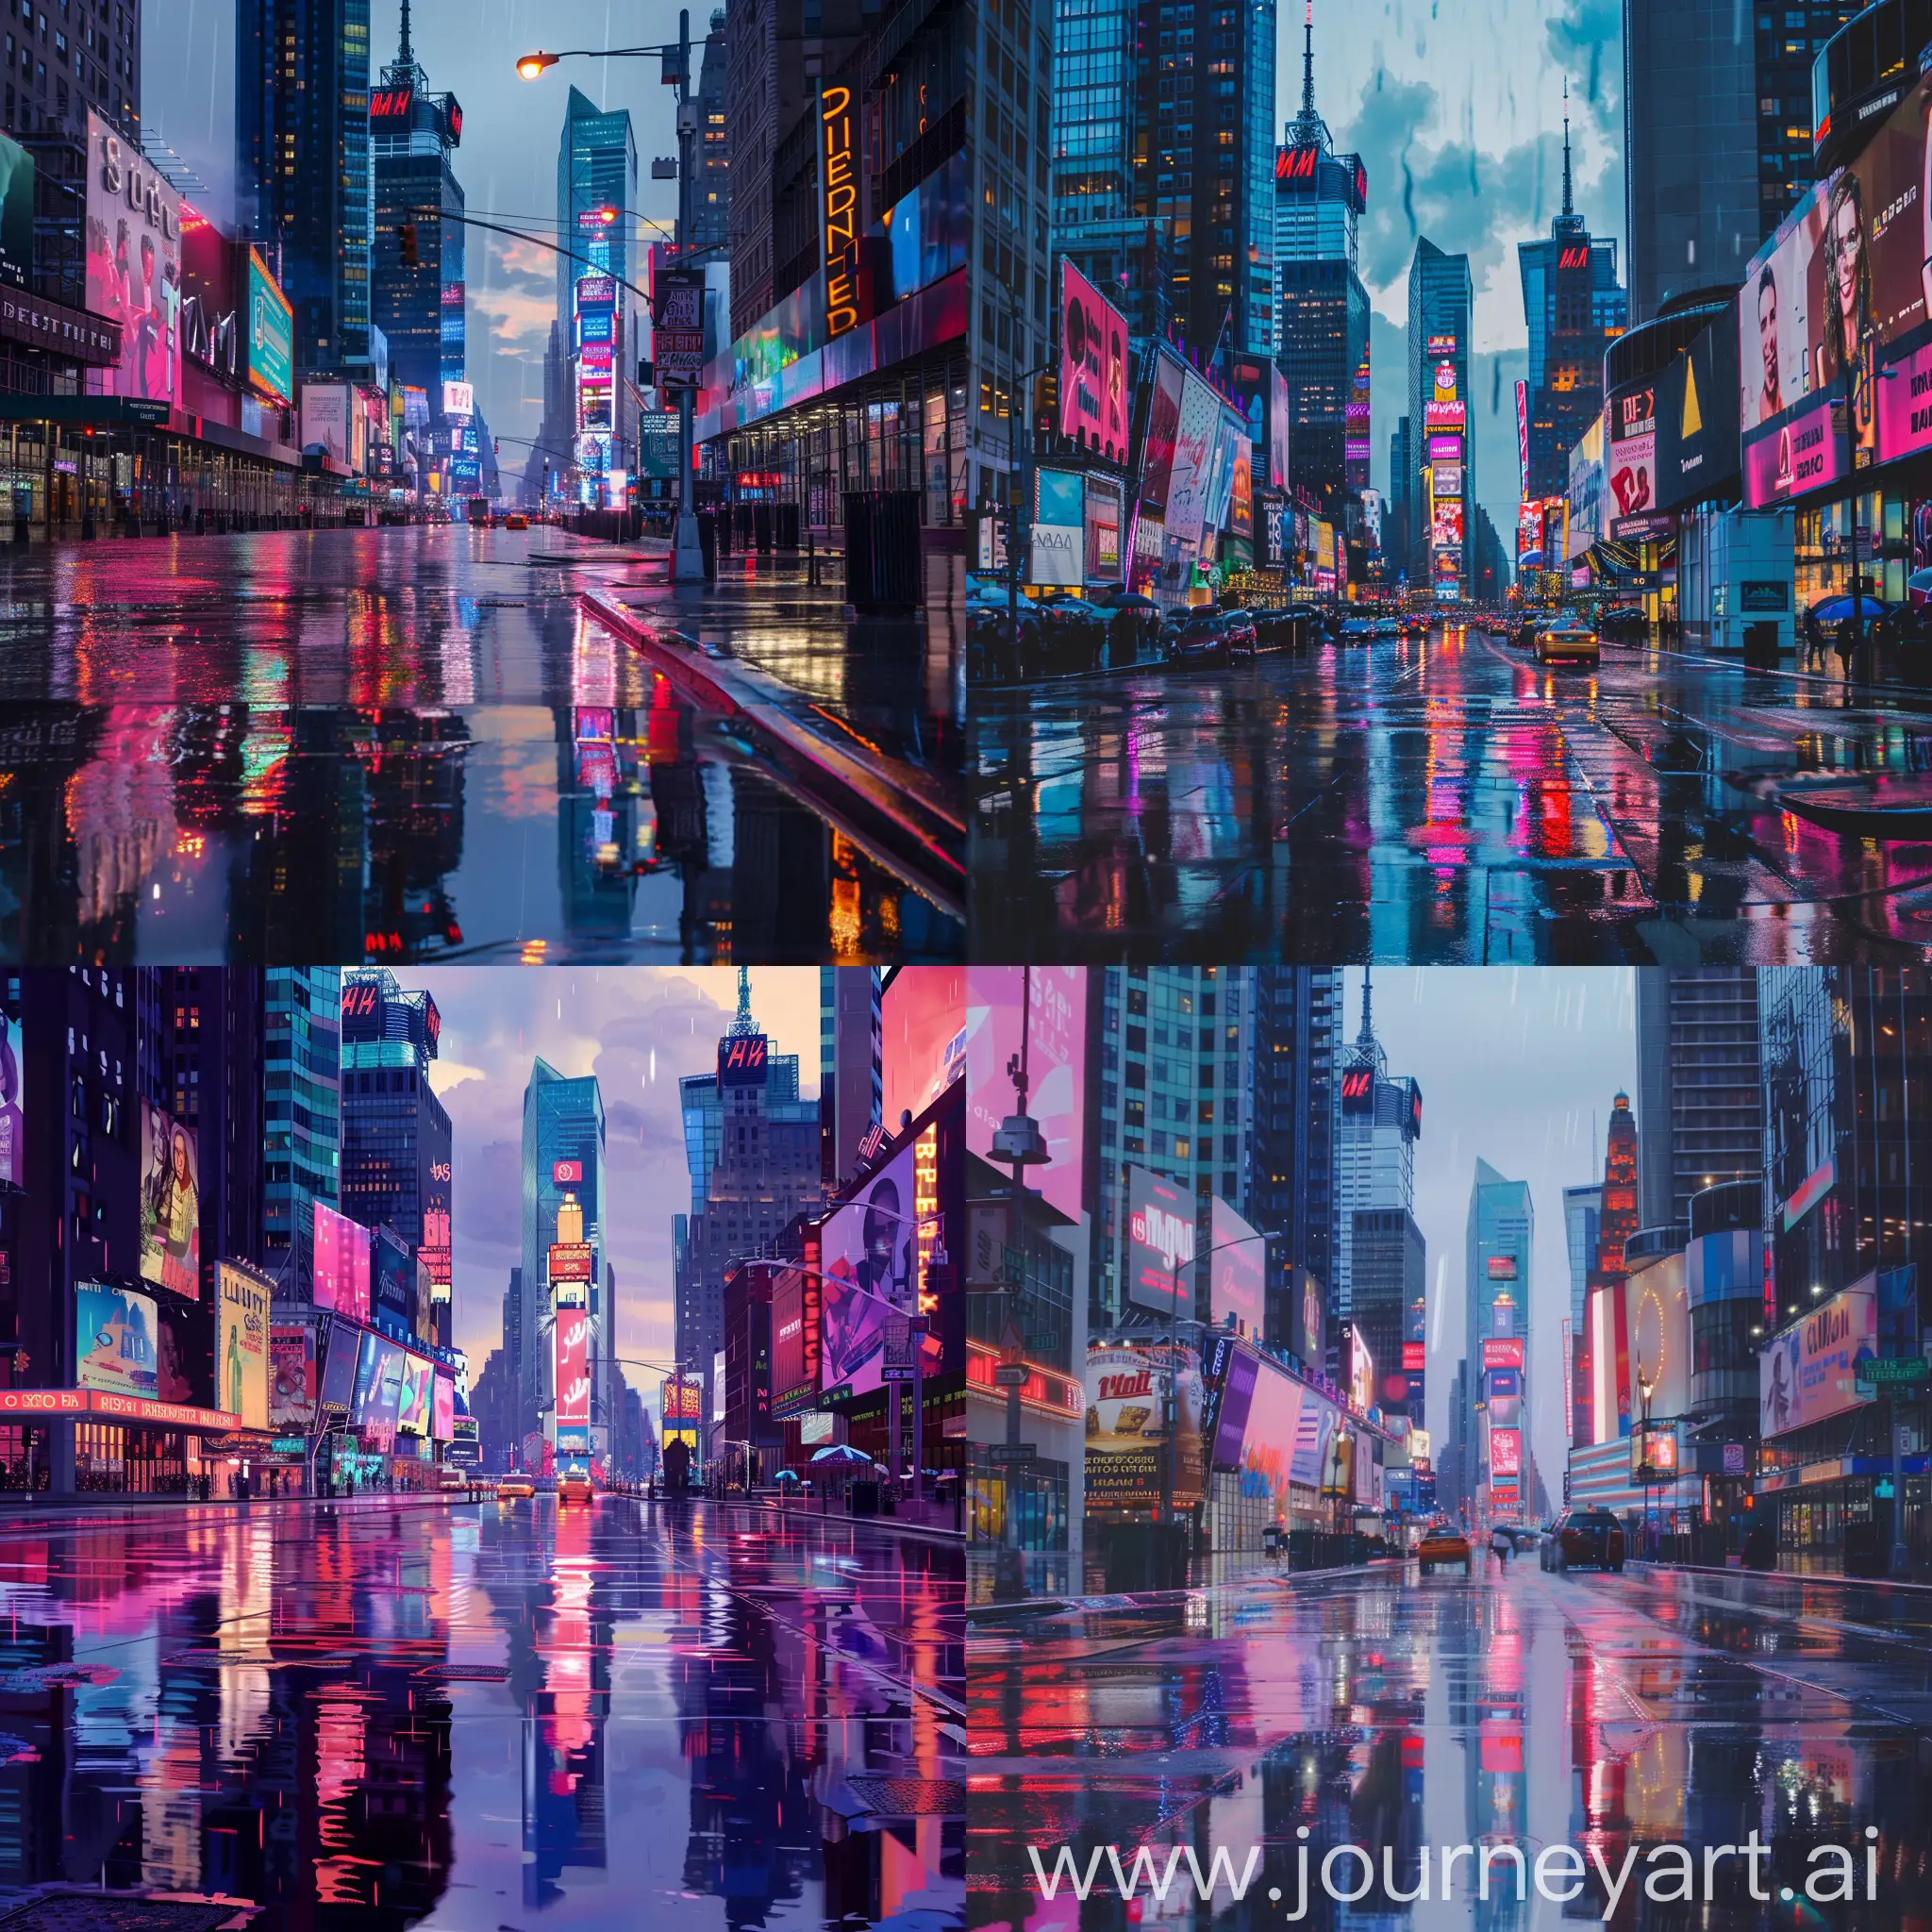 A vibrant cityscape at twilight, with towering skyscrapers and neon lights reflecting on rain-soaked streets.